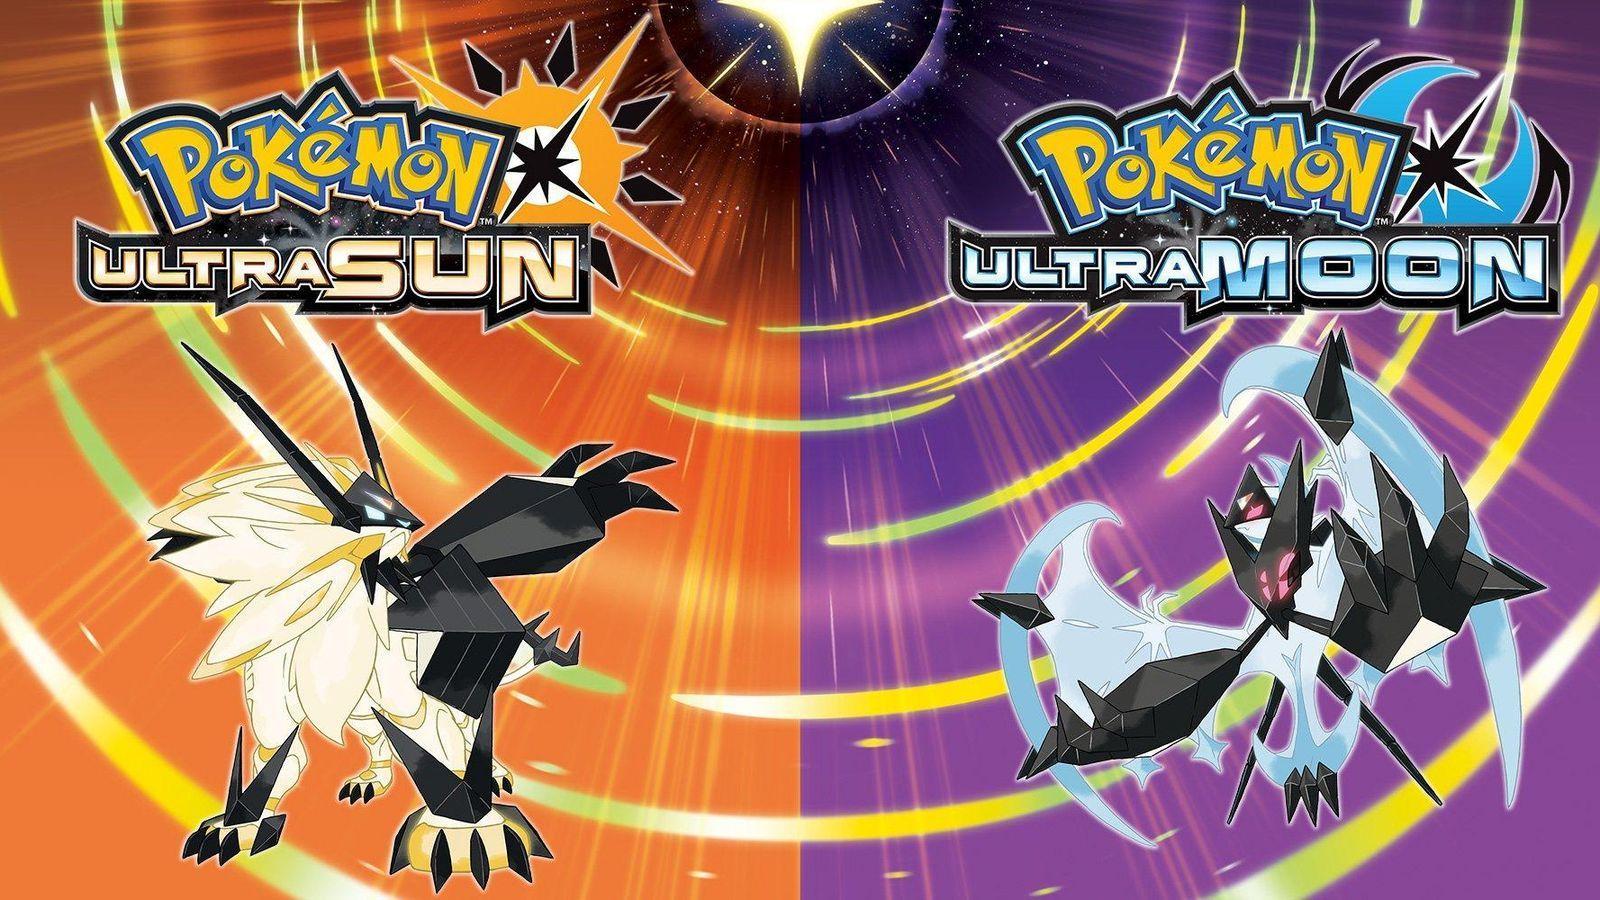 Pokémon Ultra Sun and Ultra Moon are coming only to